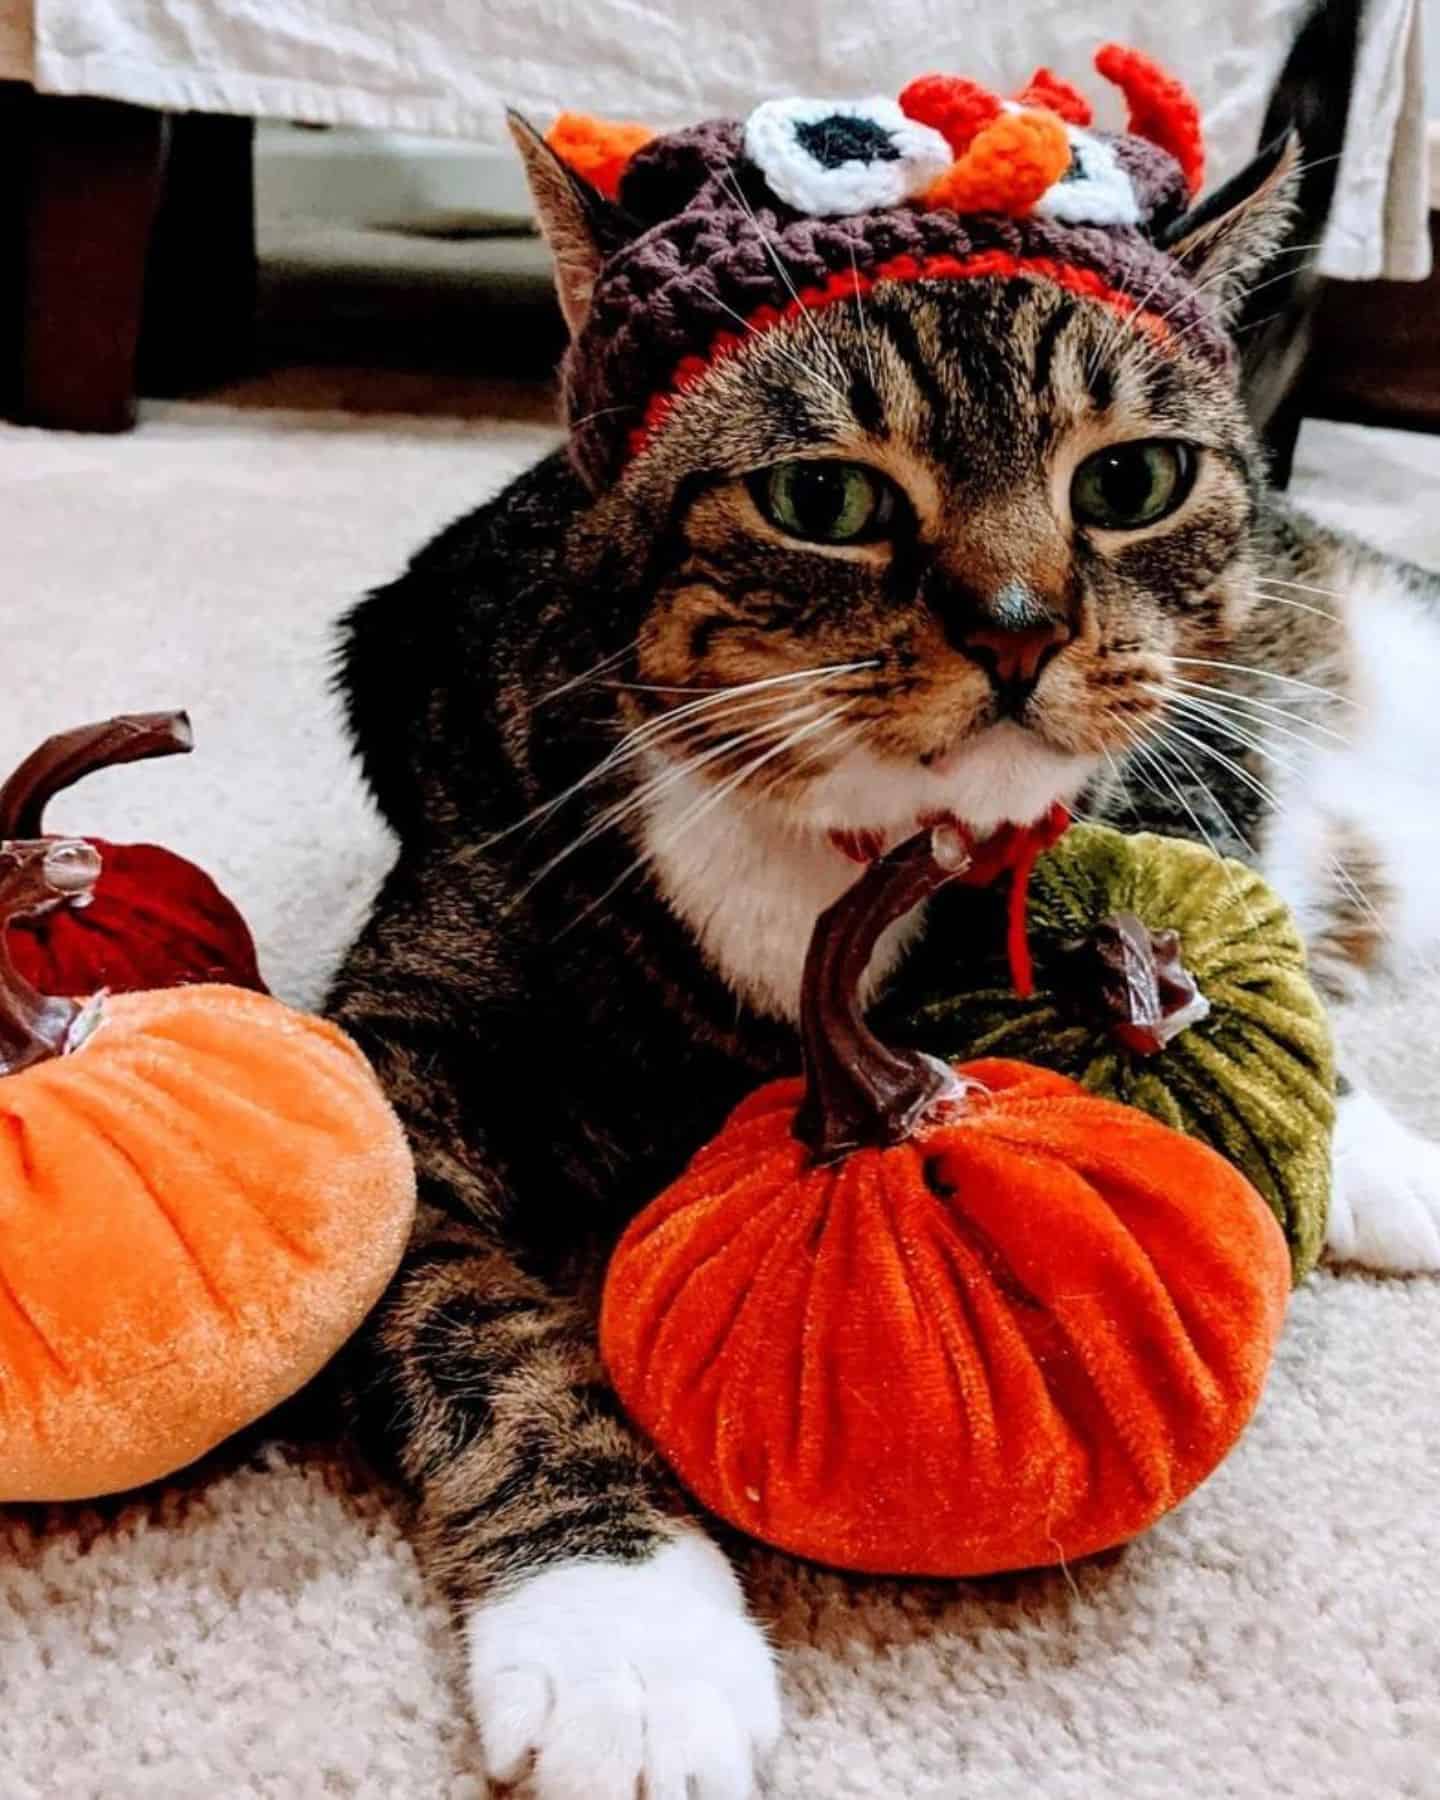 a cat with a colorful cap poses next to a stuffed pumpkin